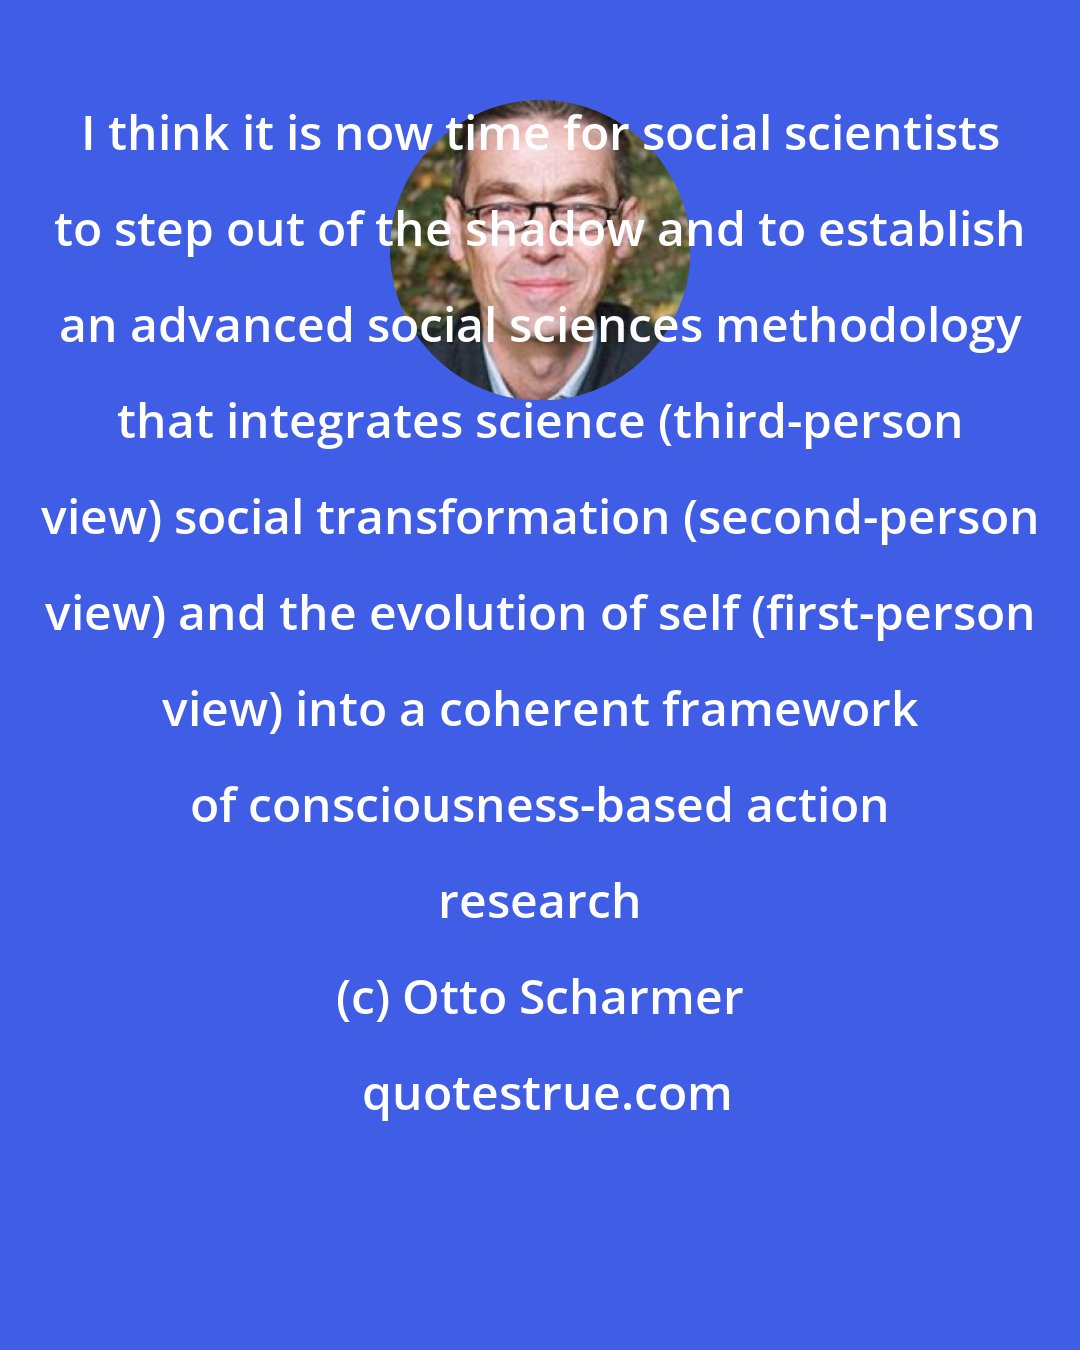 Otto Scharmer: I think it is now time for social scientists to step out of the shadow and to establish an advanced social sciences methodology that integrates science (third-person view) social transformation (second-person view) and the evolution of self (first-person view) into a coherent framework of consciousness-based action research